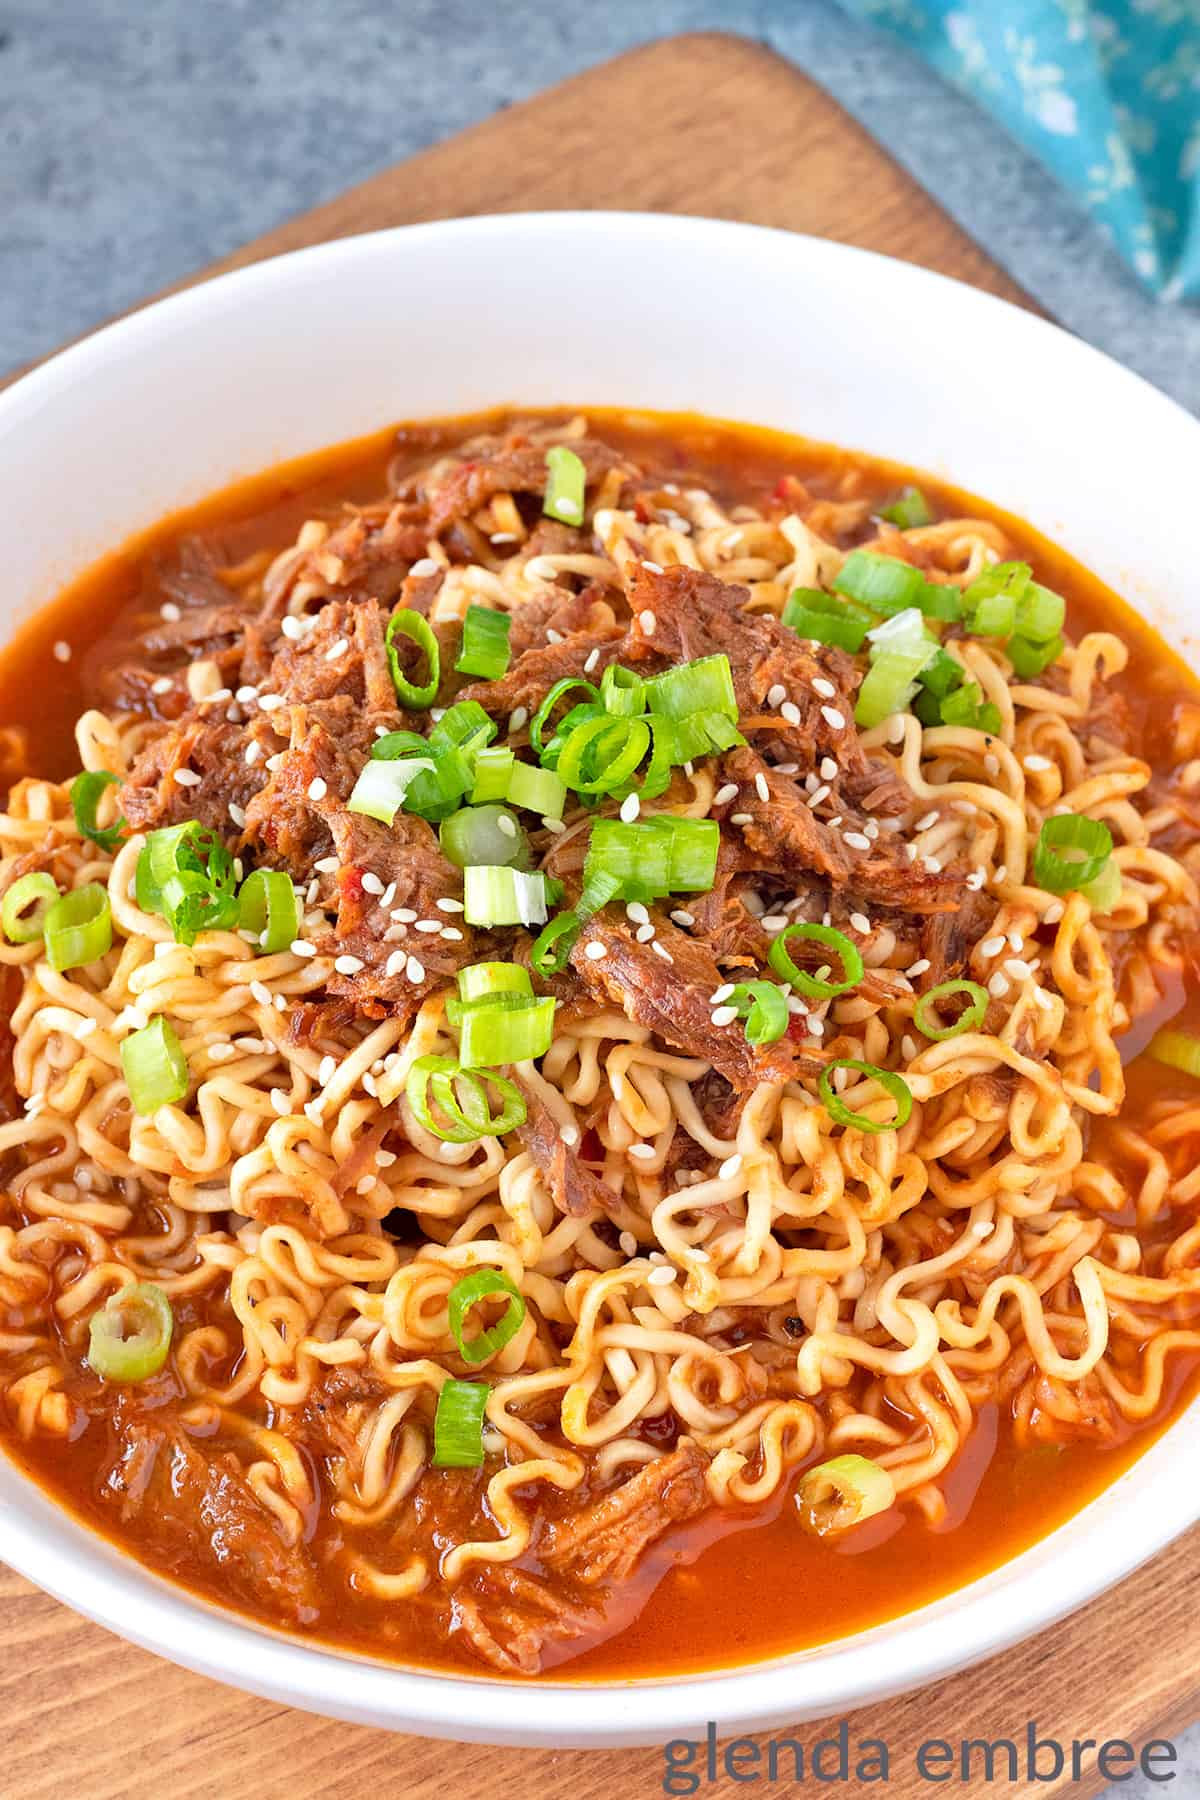 Ramen made with Mexican Shredded Beef broth and Mexican shredded beef.  Topped with sliced green onions and sesame seeds.